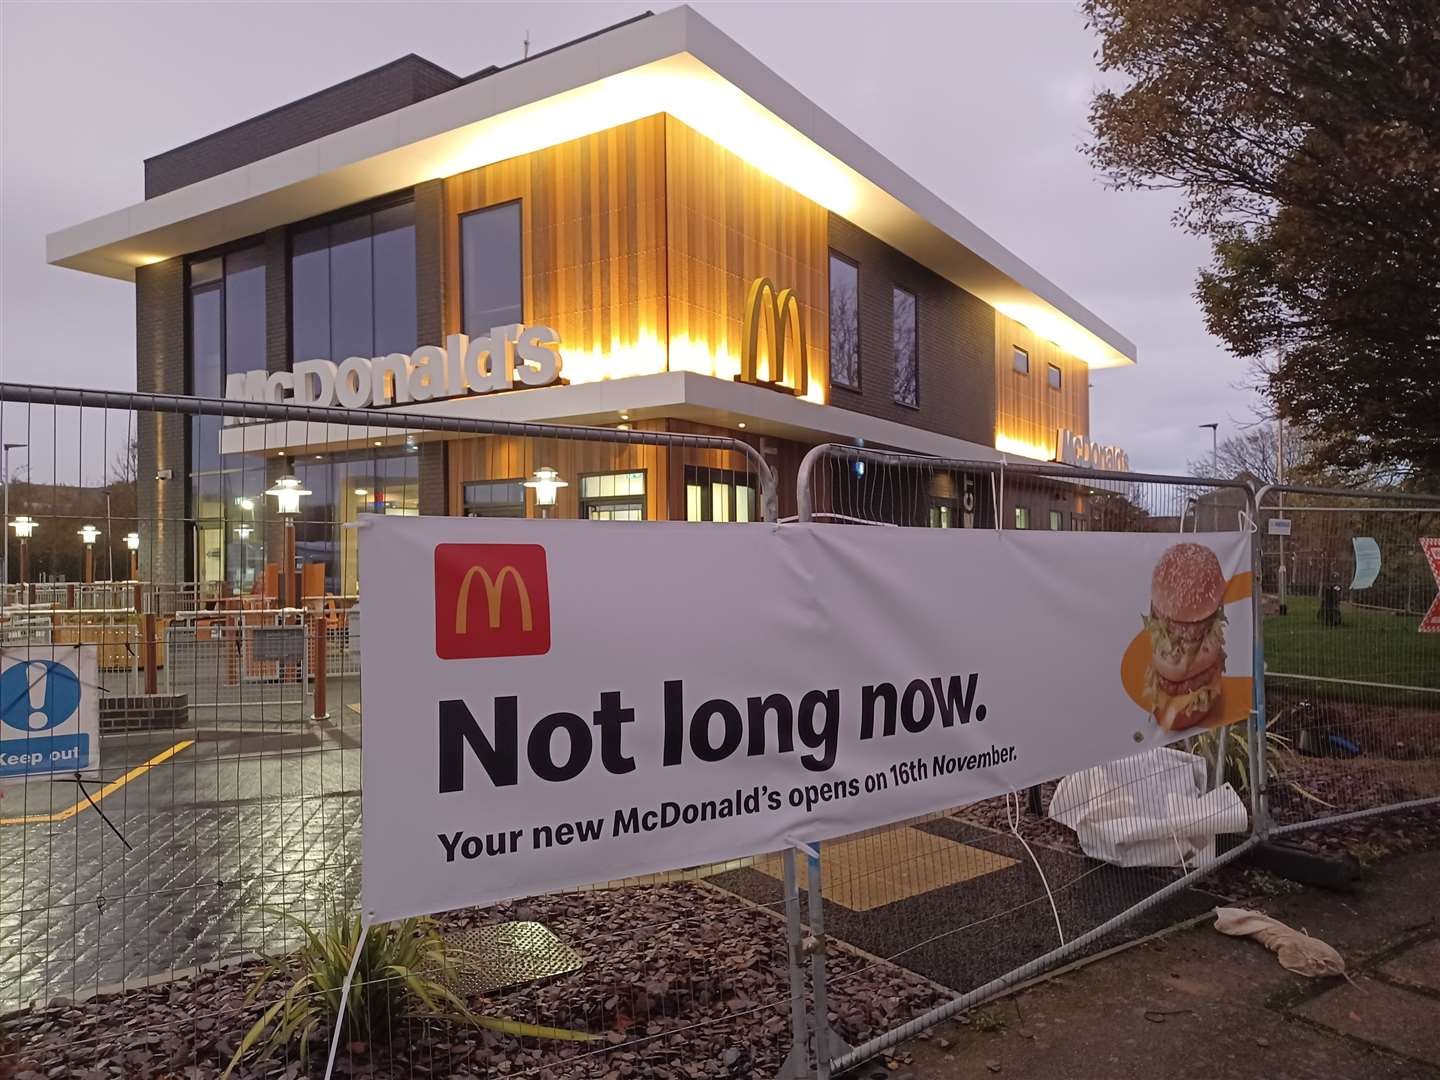 The banner confirming the McDonald's will open on November 16